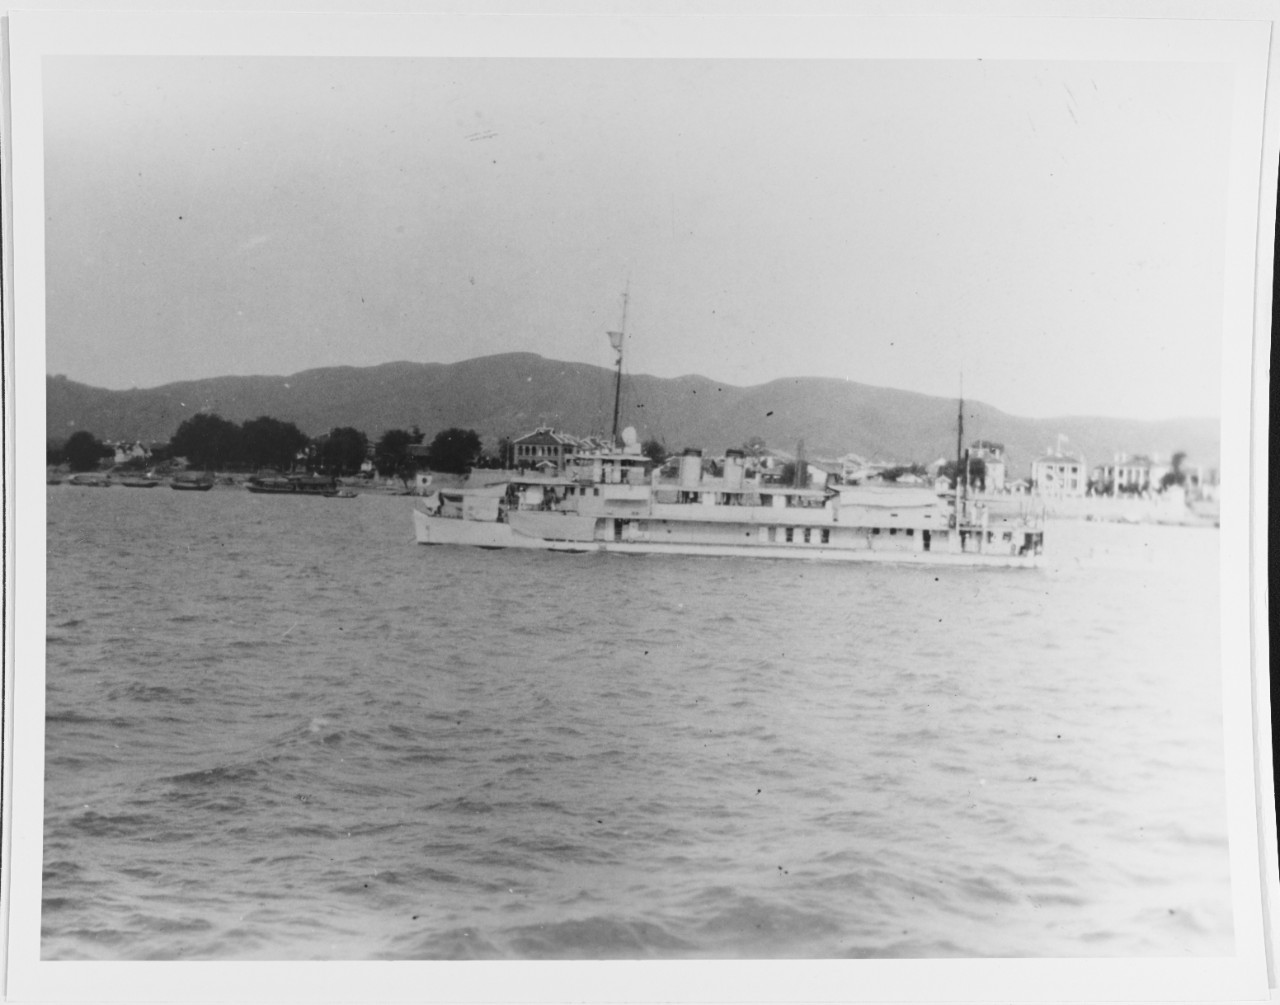 His Imperial Japanese Majesty's ship ATAMI